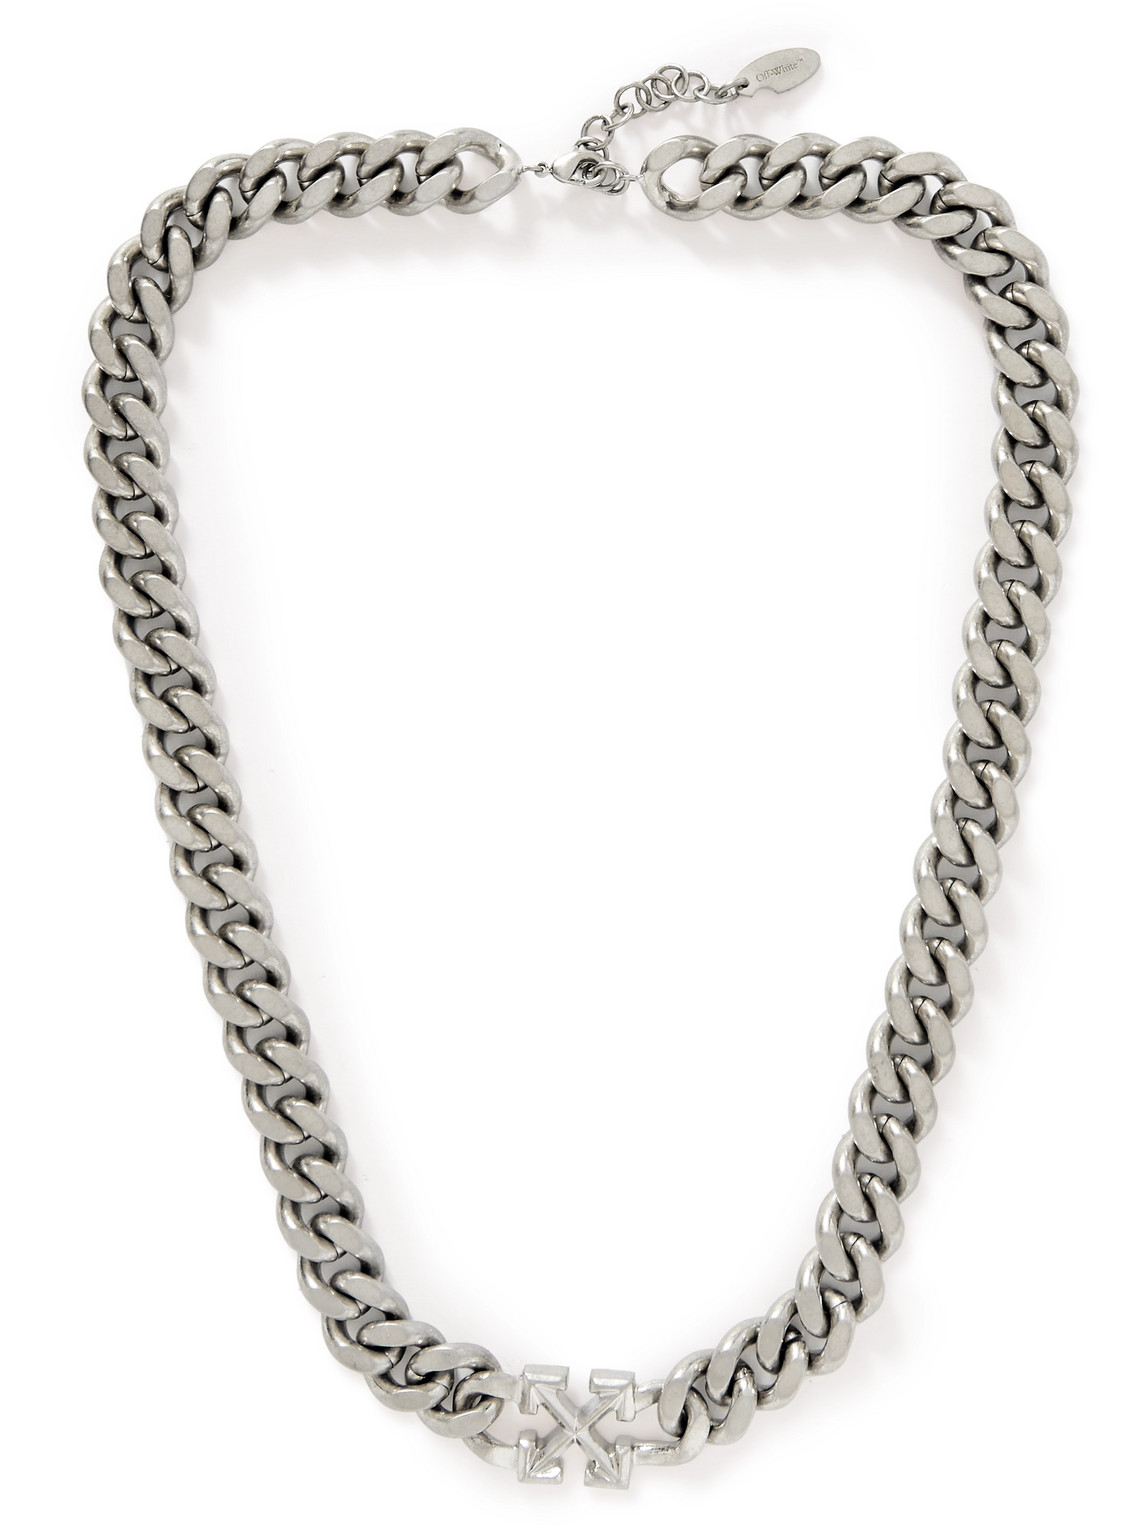 Off-White c/o Virgil Abloh Crystal Arrow Chain Necklace - Silver